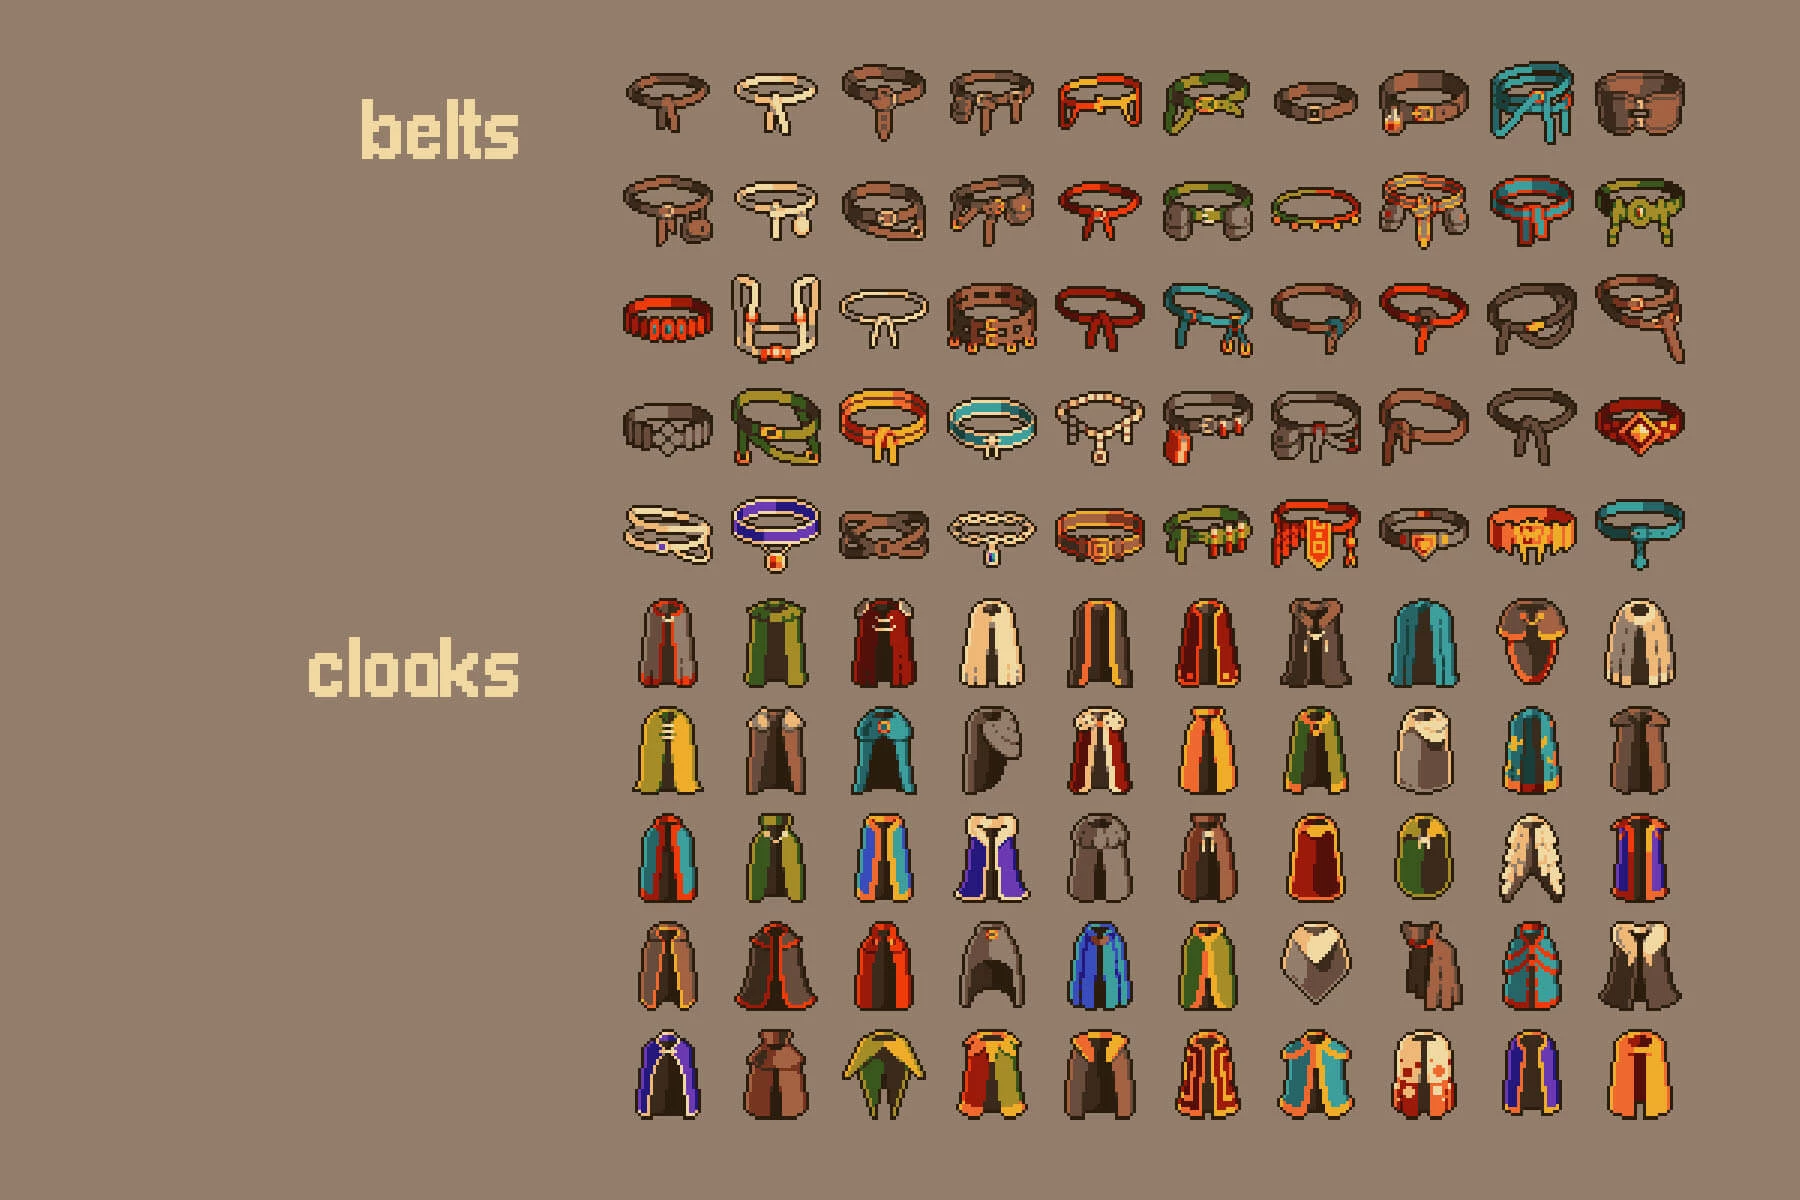 Pixel Art Journey on X: 32x32 game icons for practice. I think